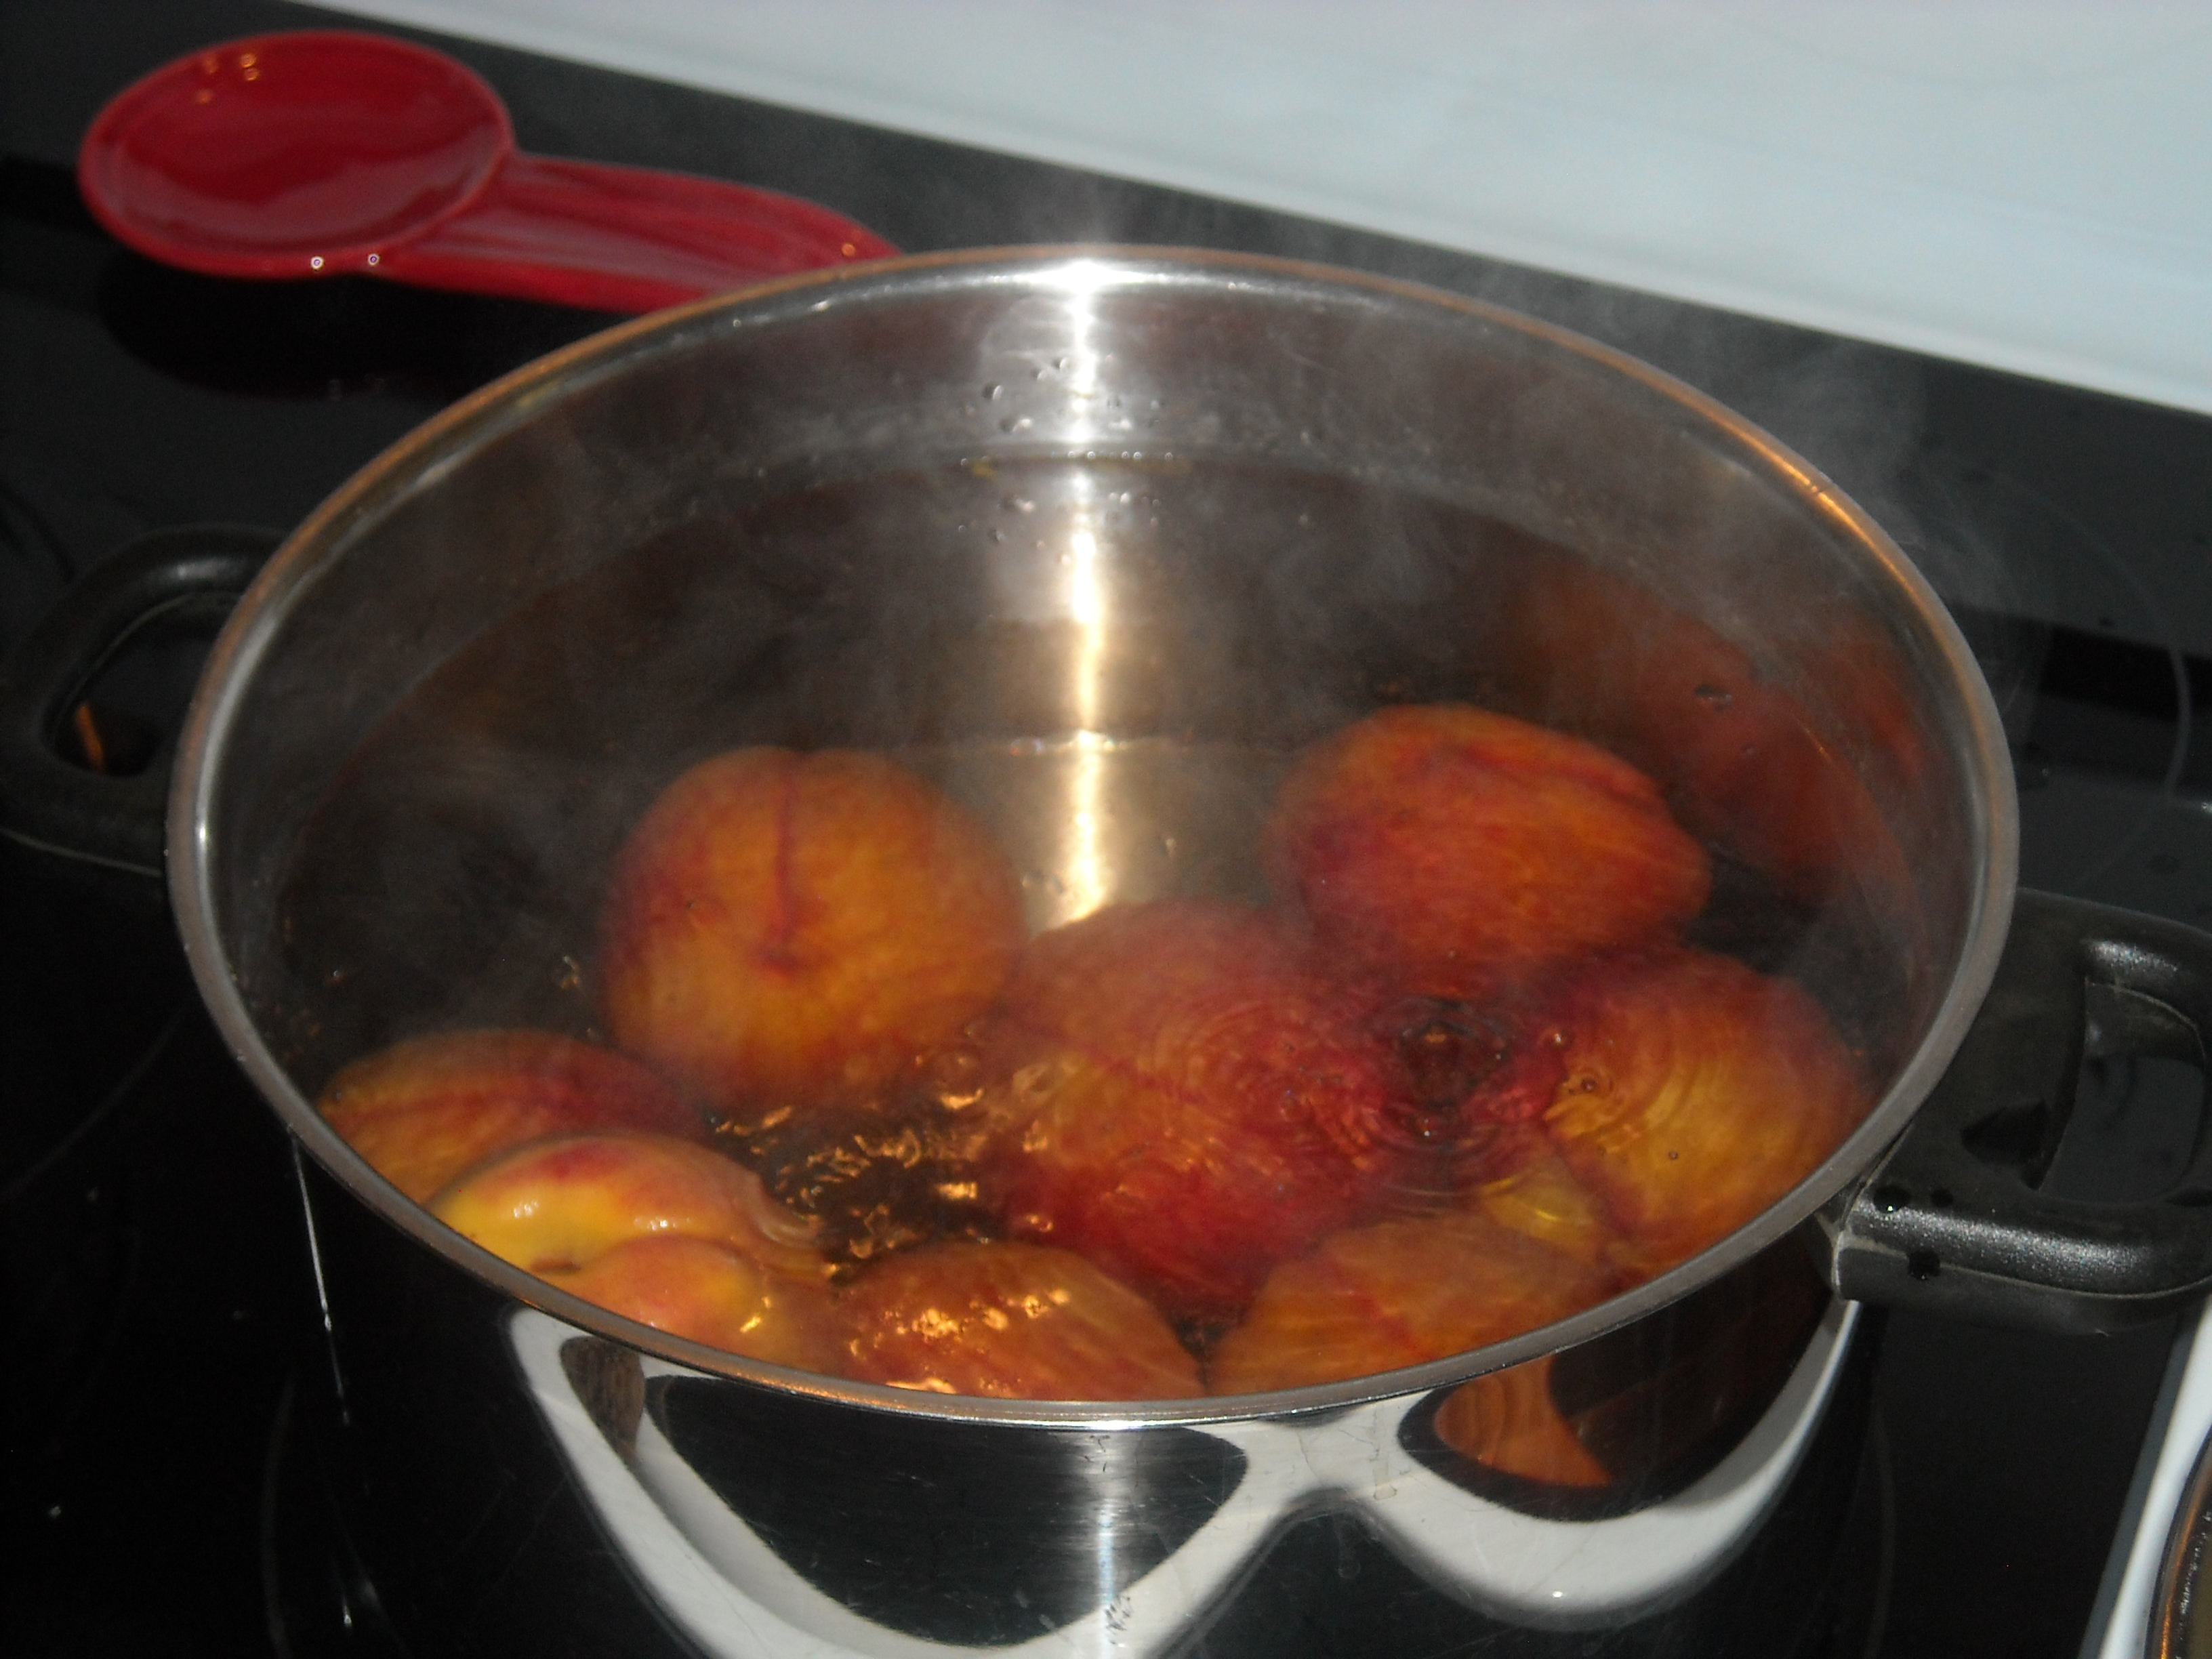 Peaches in boiling water.